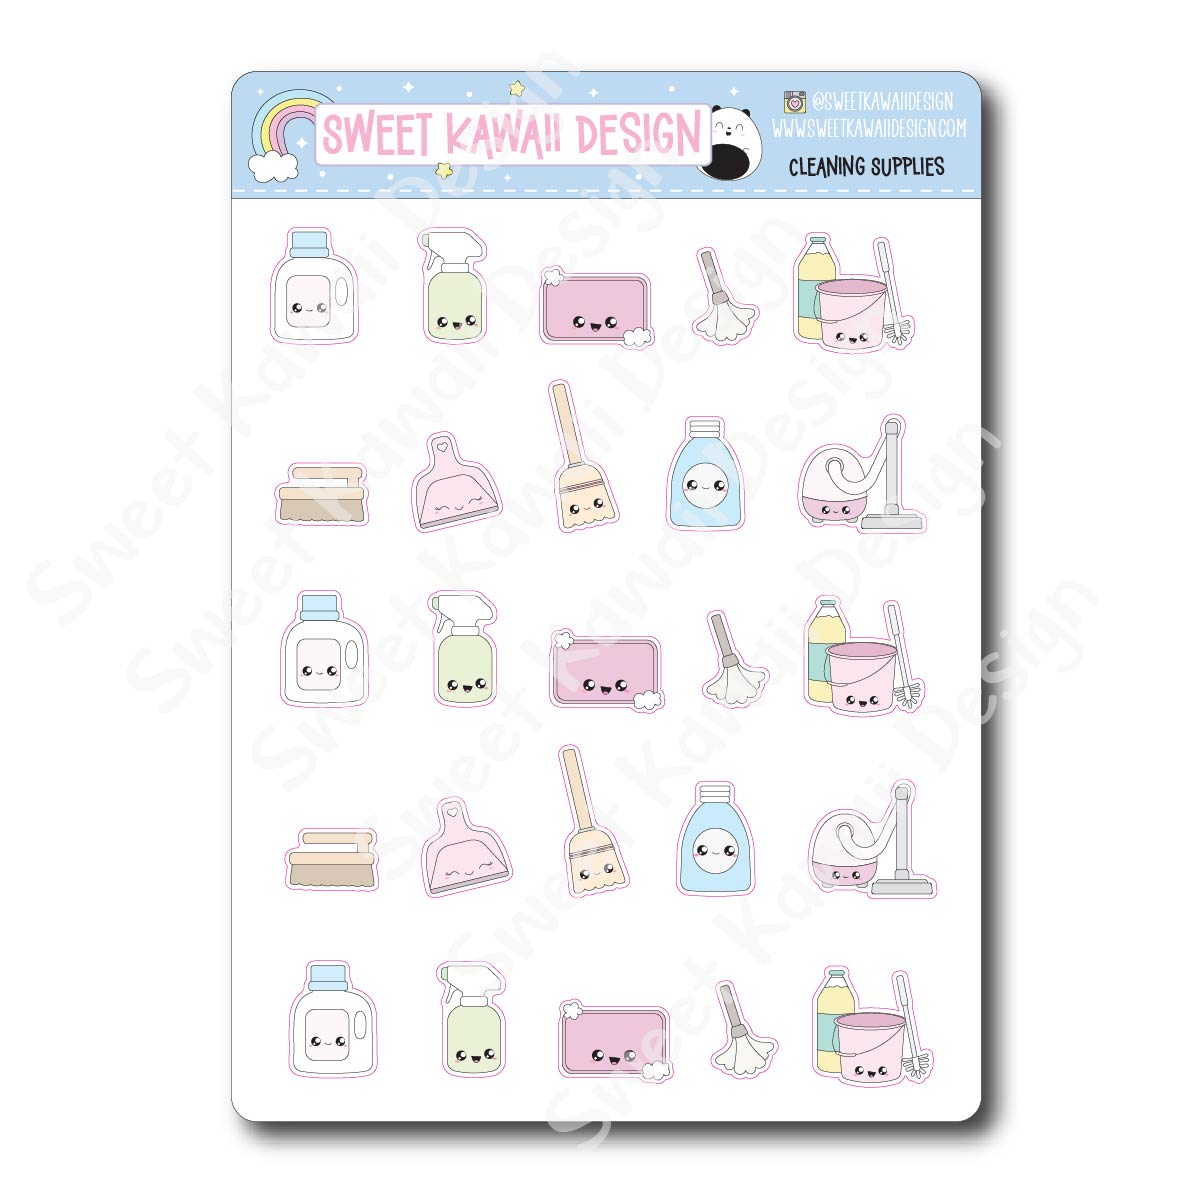 Kawaii Cleaning Supply Stickers